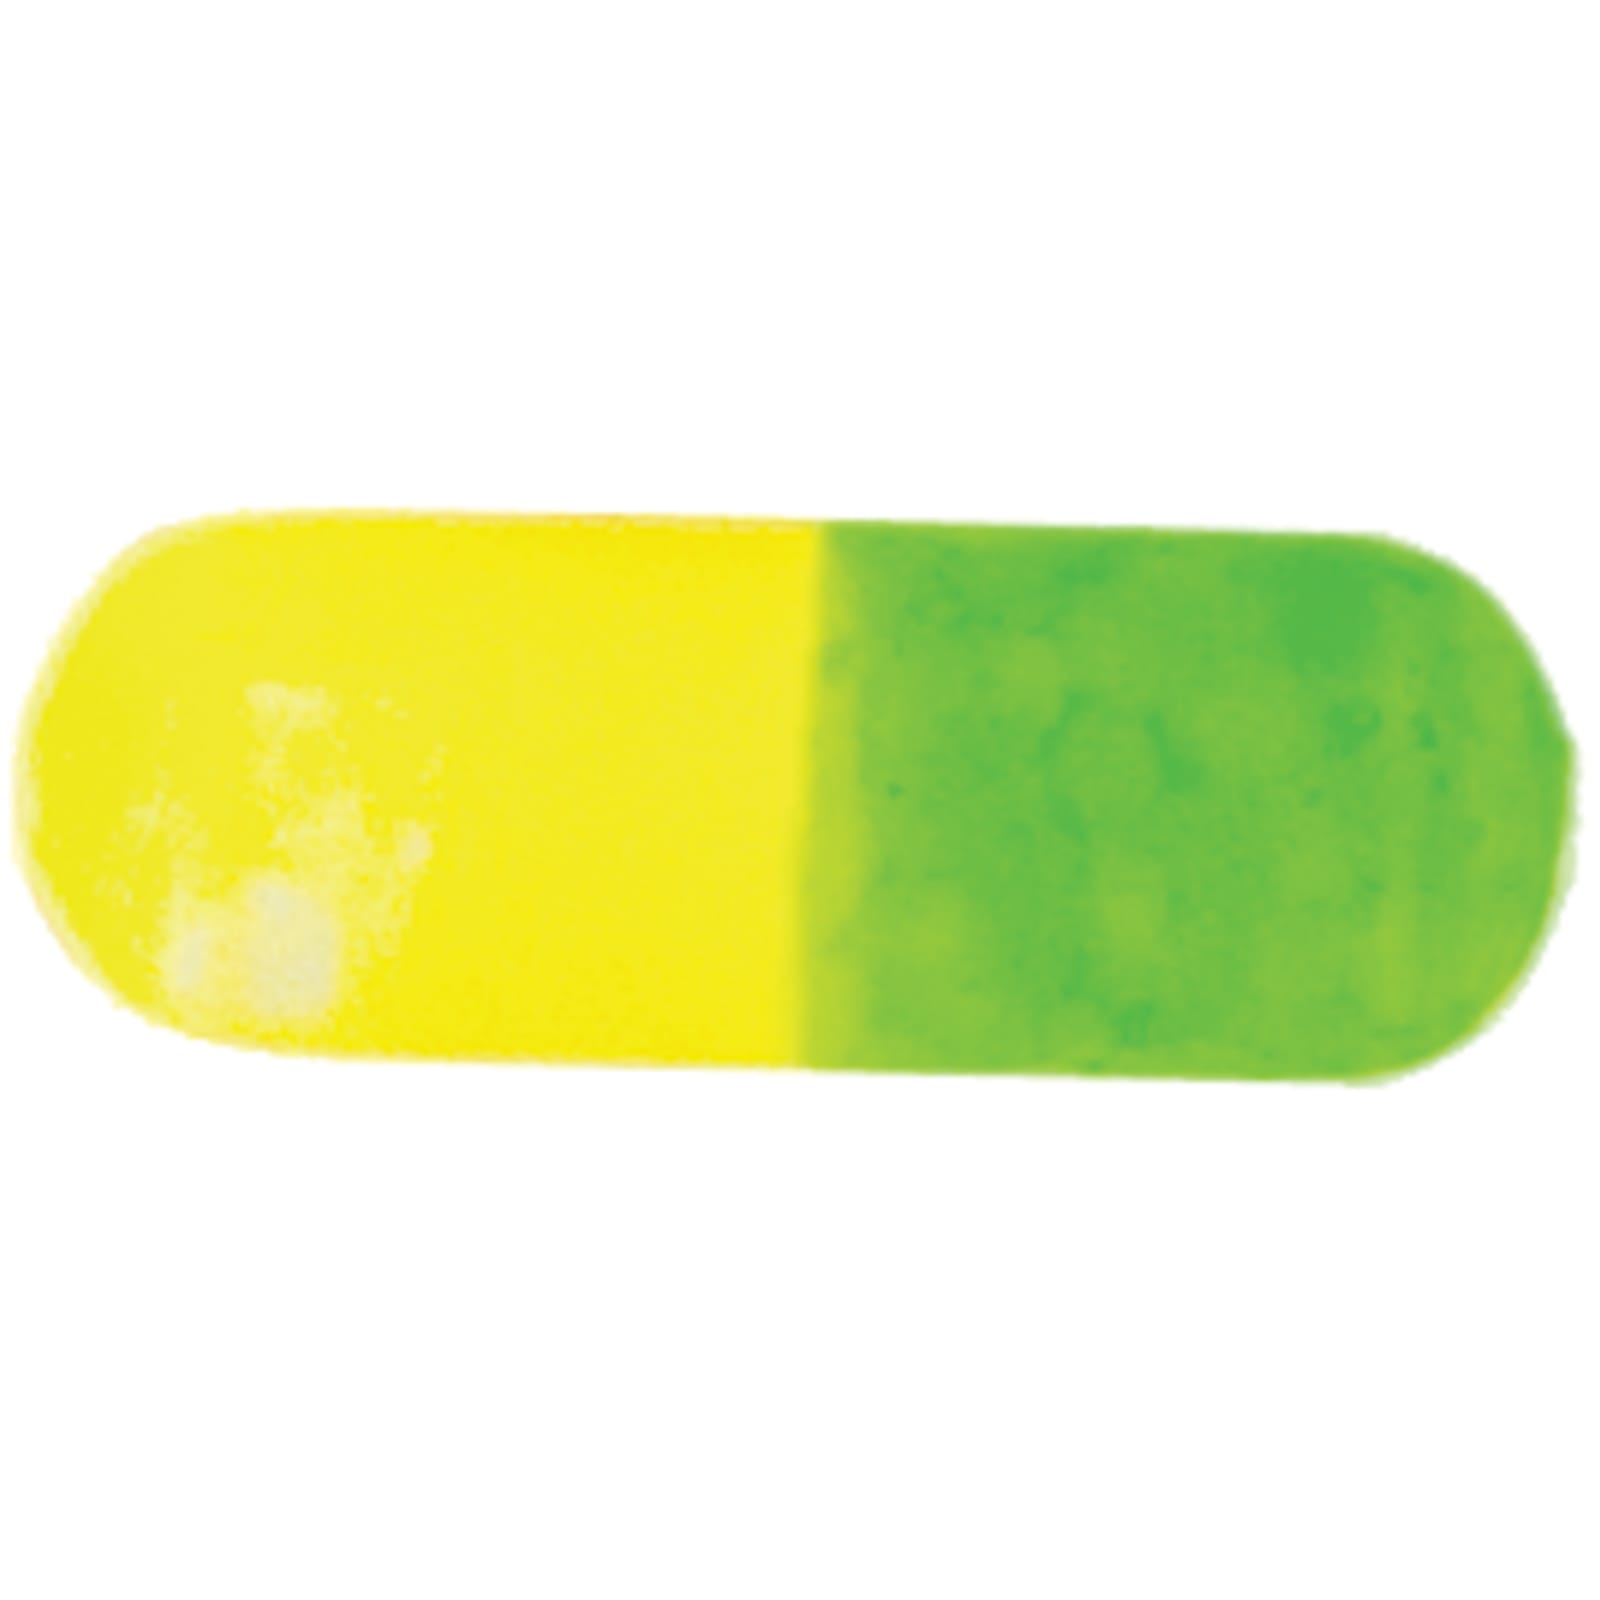 Lindy Snell Floats, Lime Green/Yellow